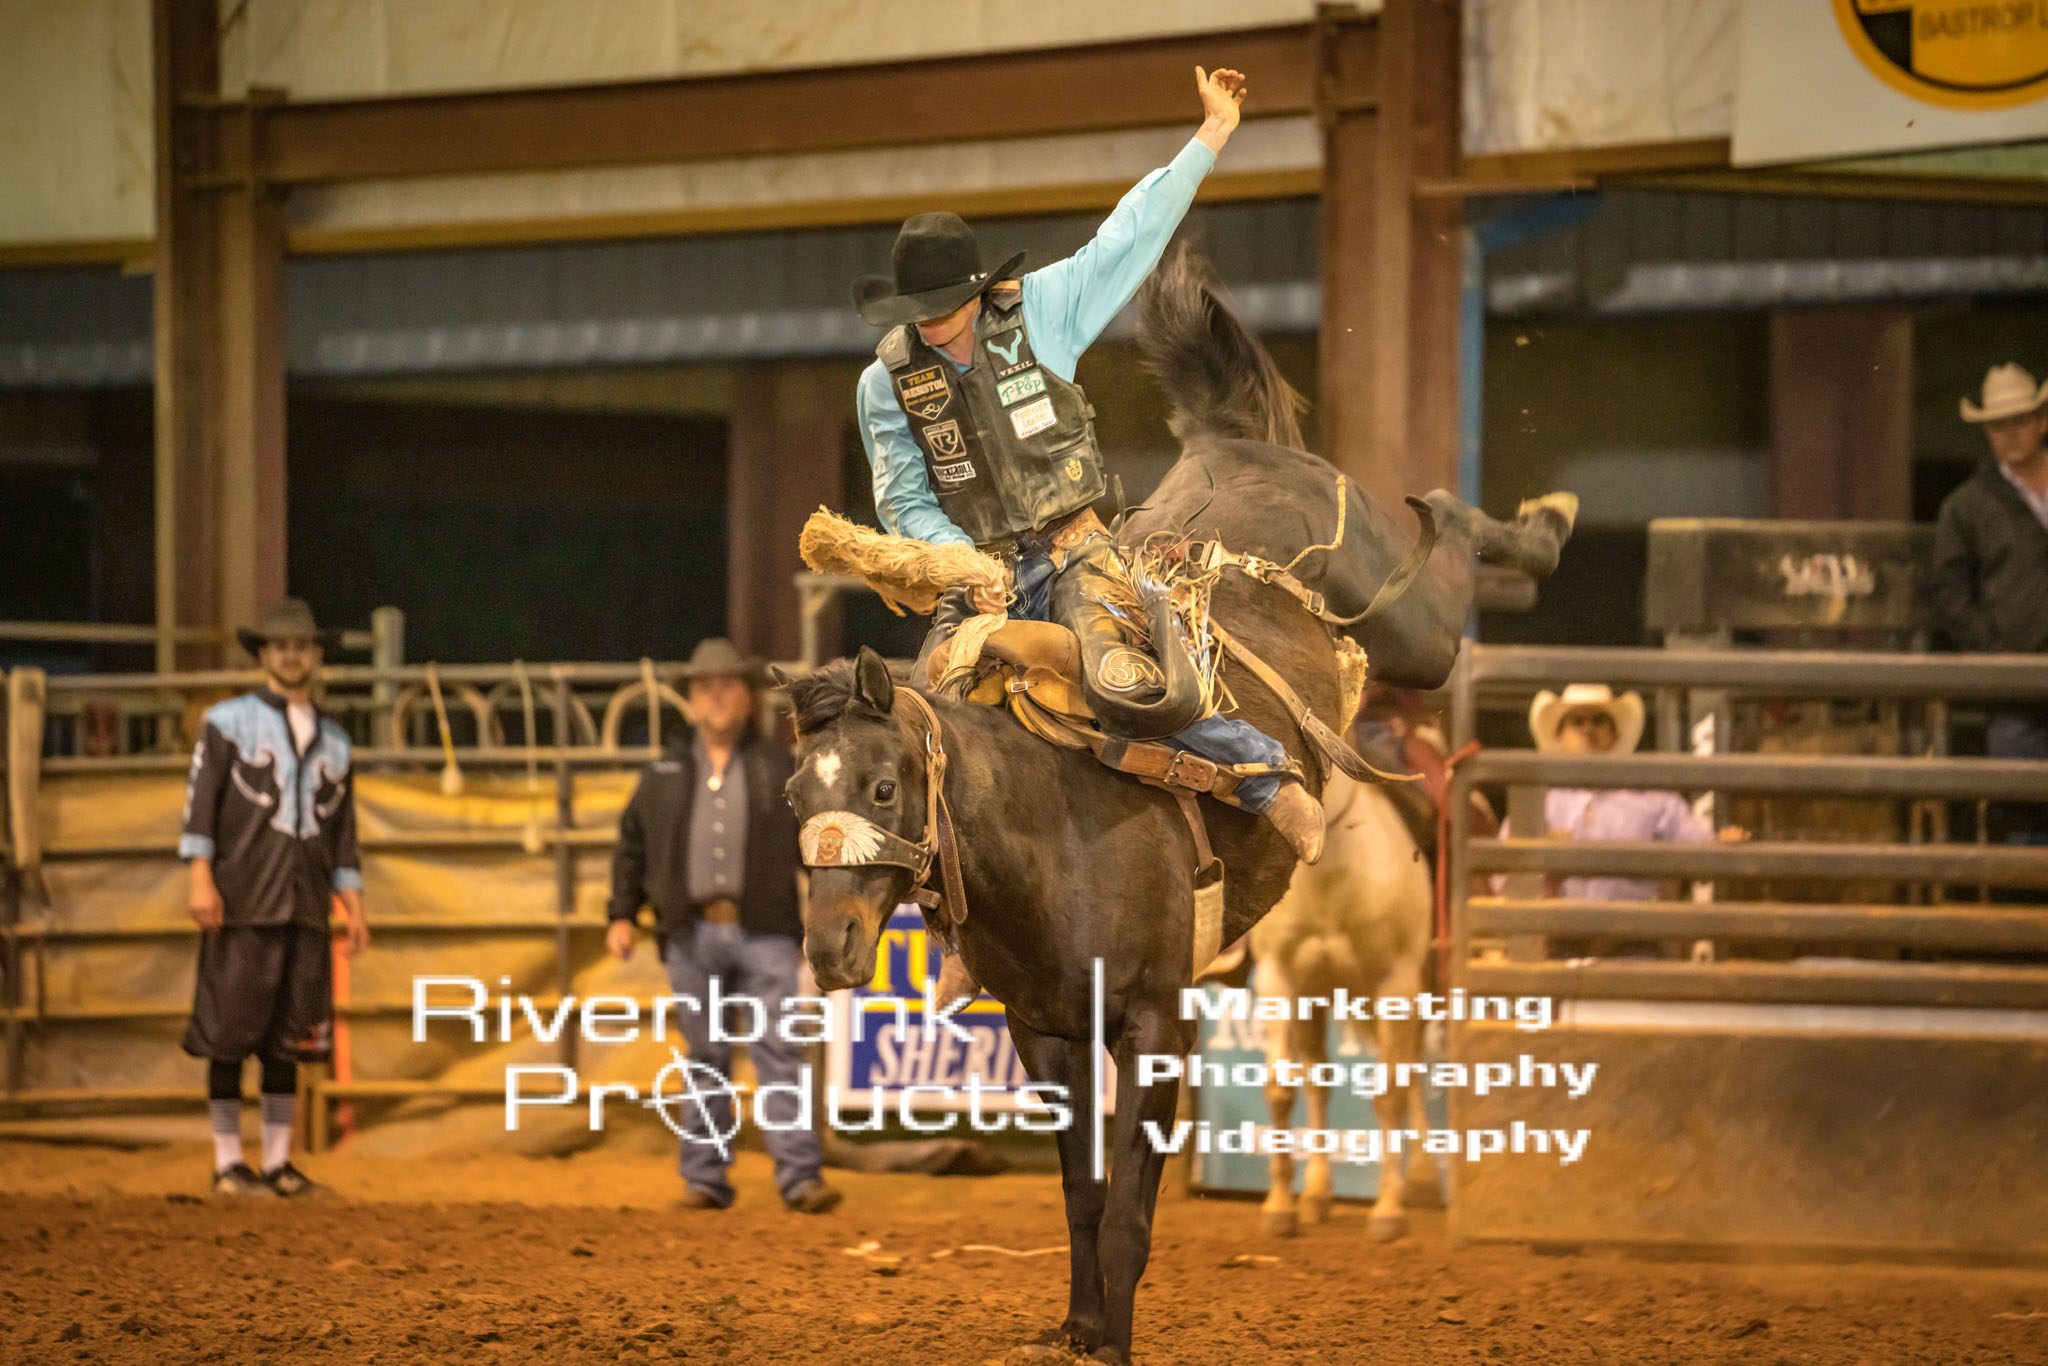 Bastrop Rodeo April 12th Riverbank Products